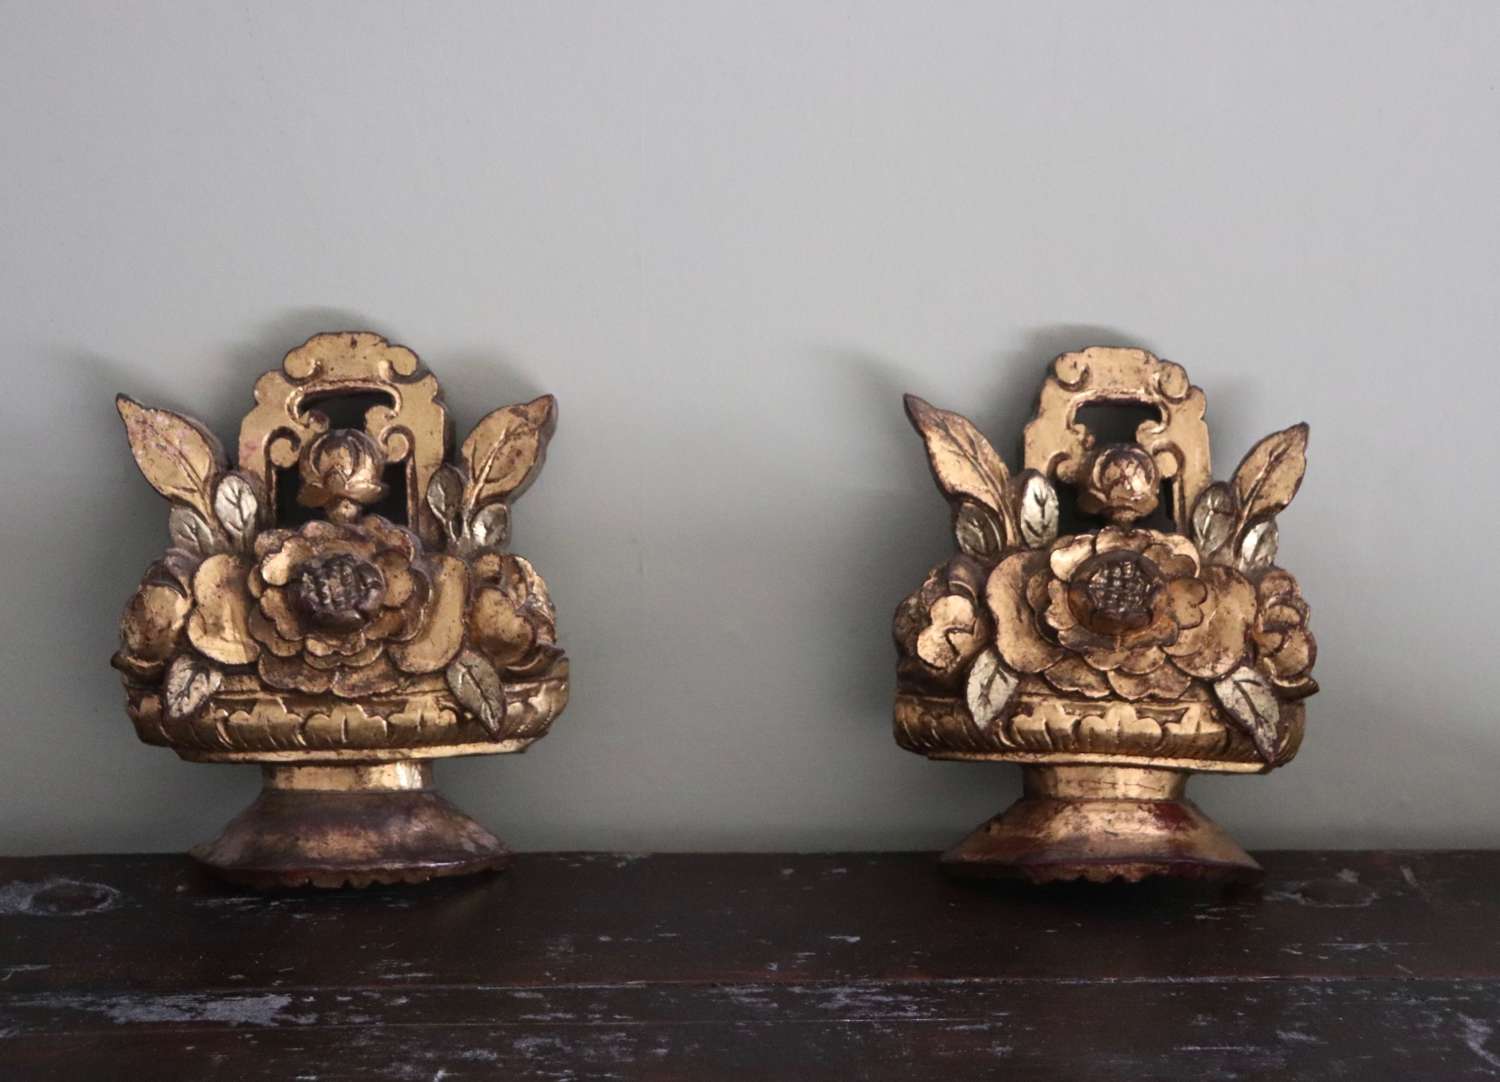 Pair of 19th century gilt wooden carvings depicting flowers in an urn